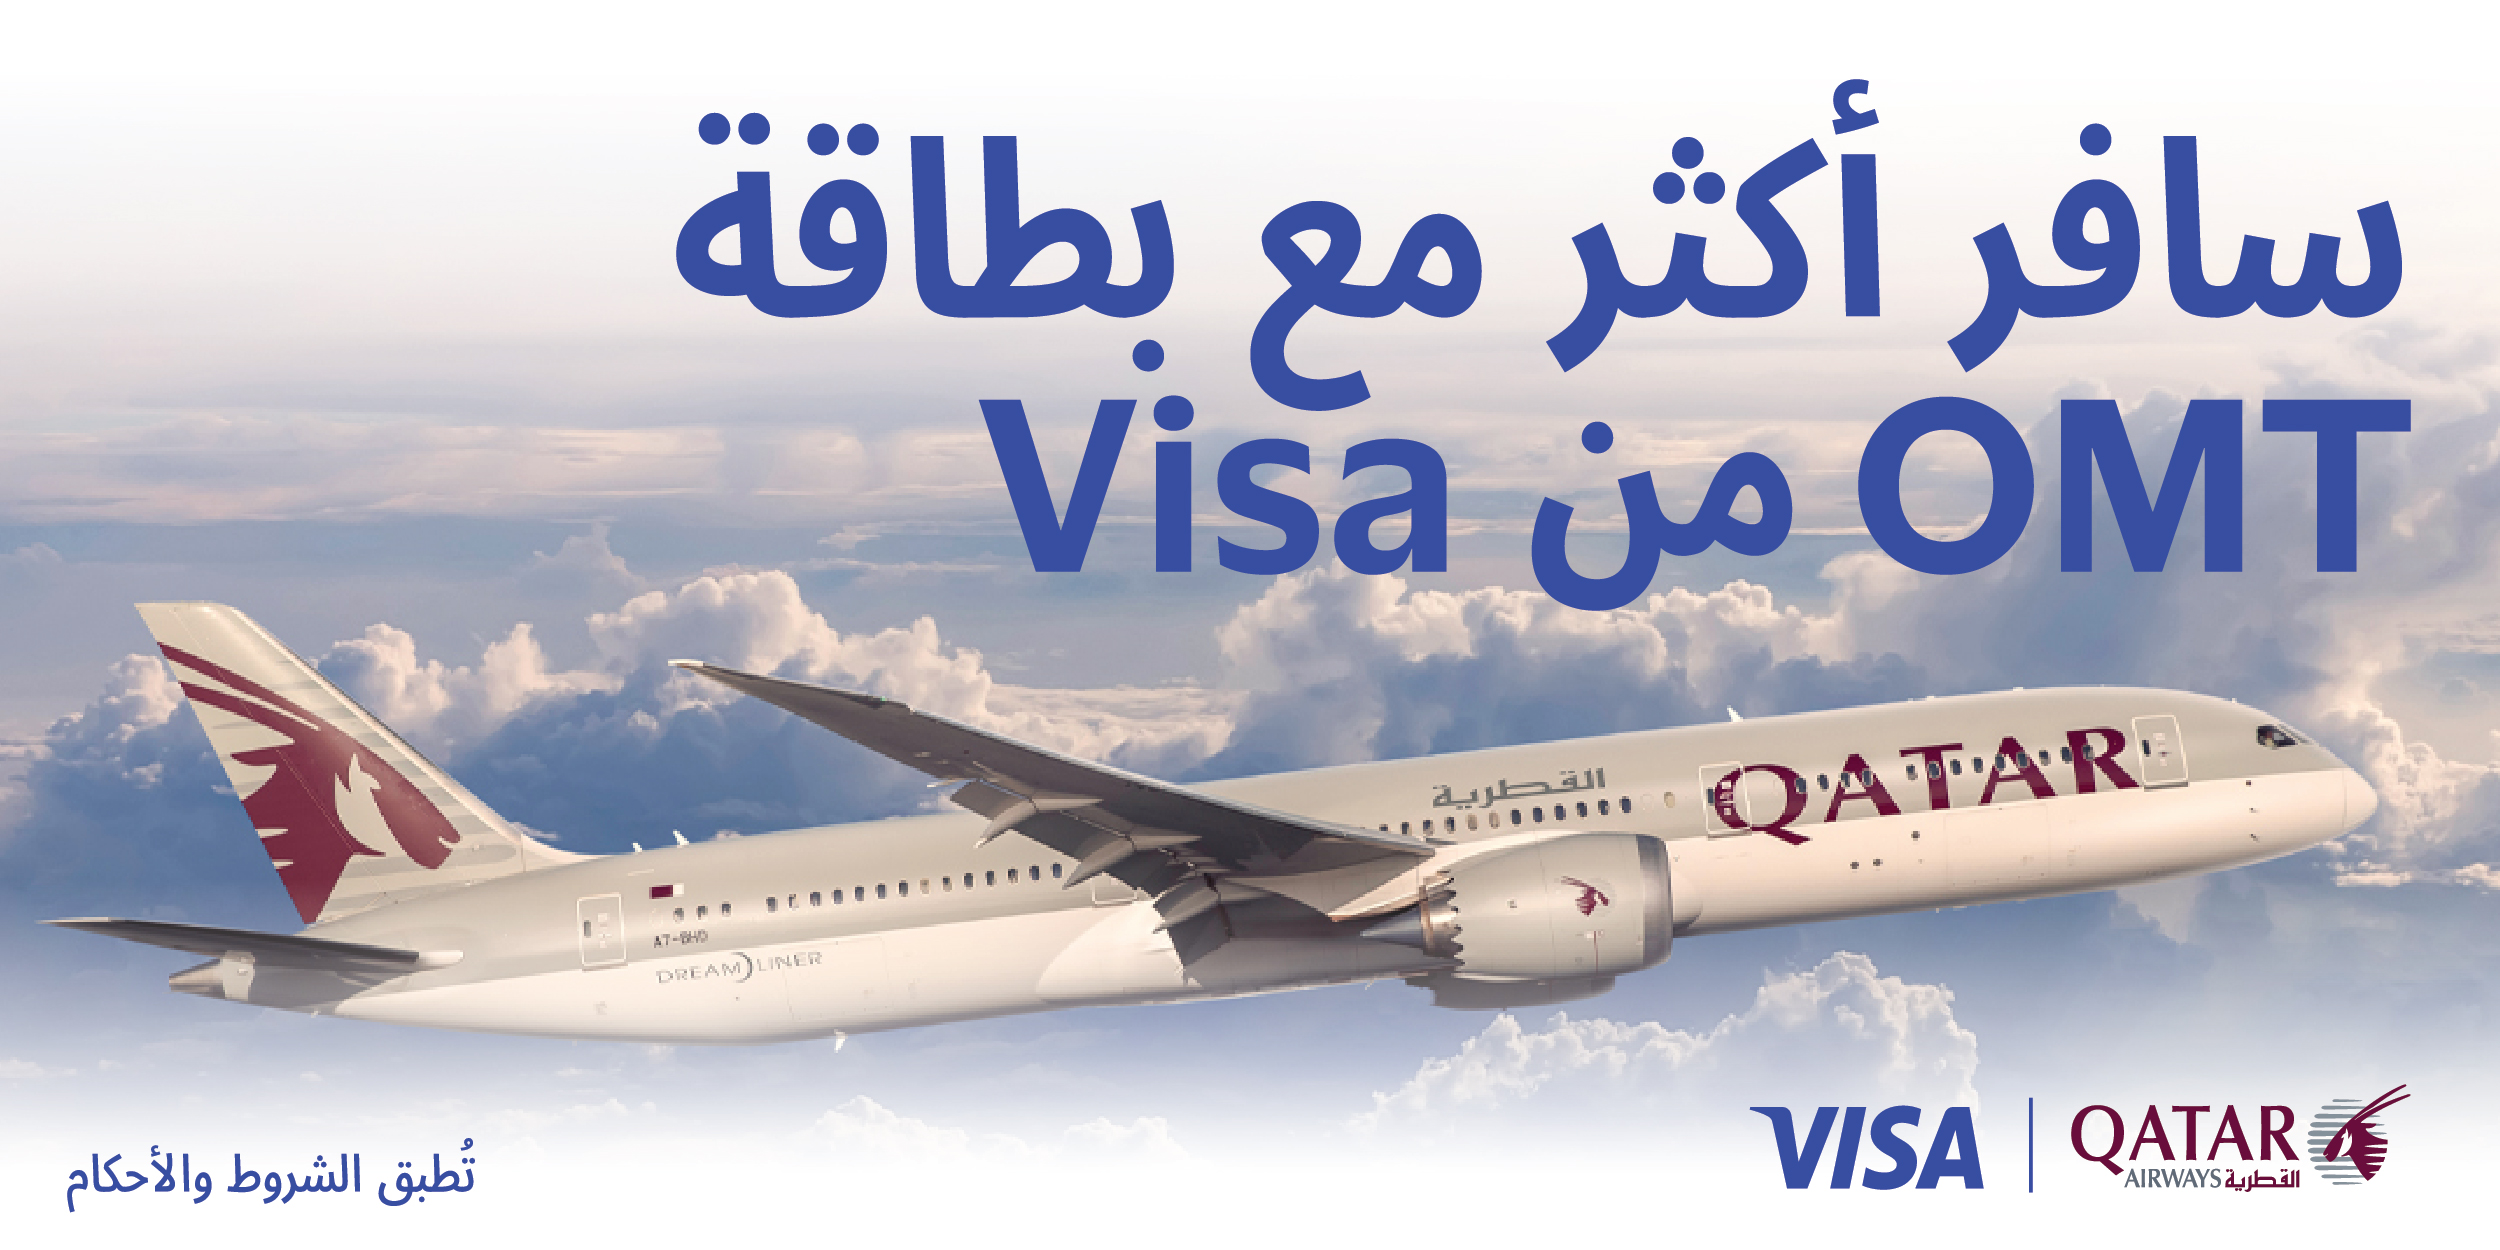 Enjoy travelling with your OMT Visa card!